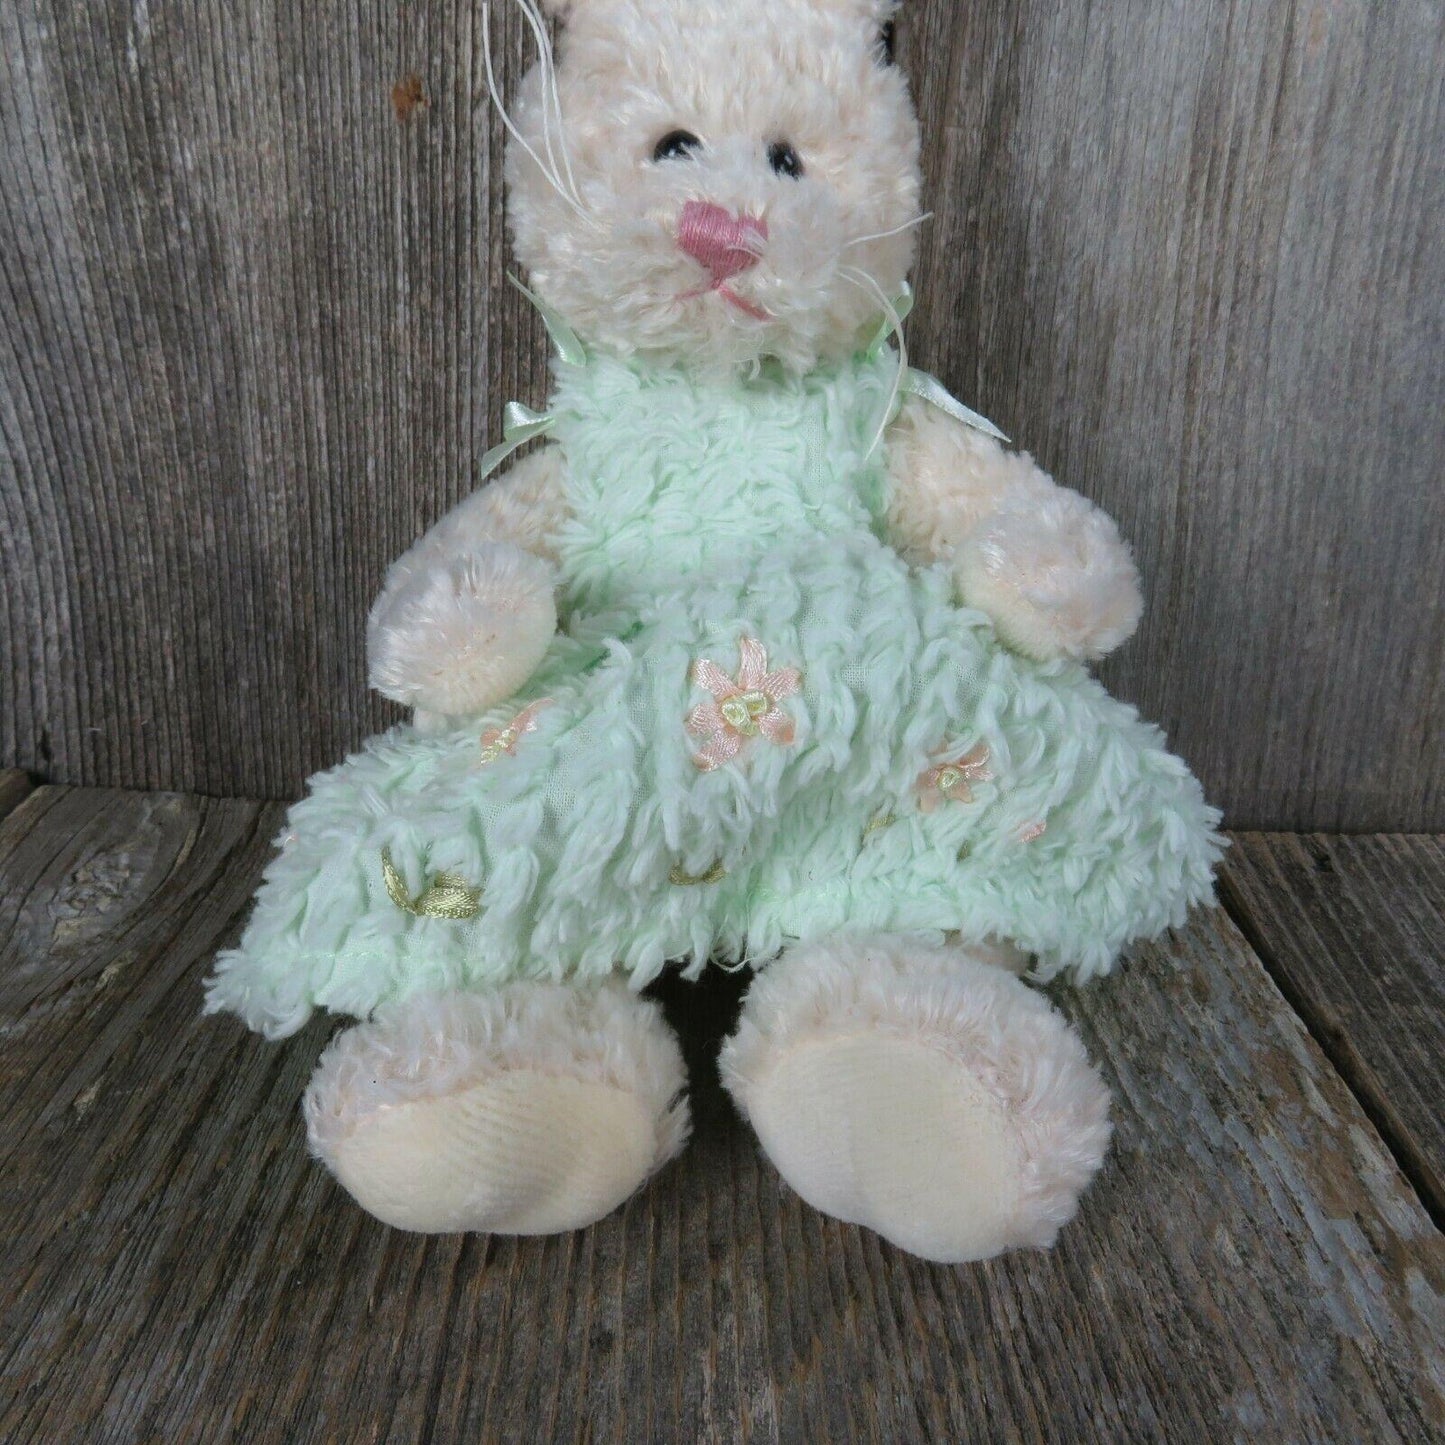 White Bunny with Green Dress Jointed Plush Unipak Rabbit Stuffed Animal Easter